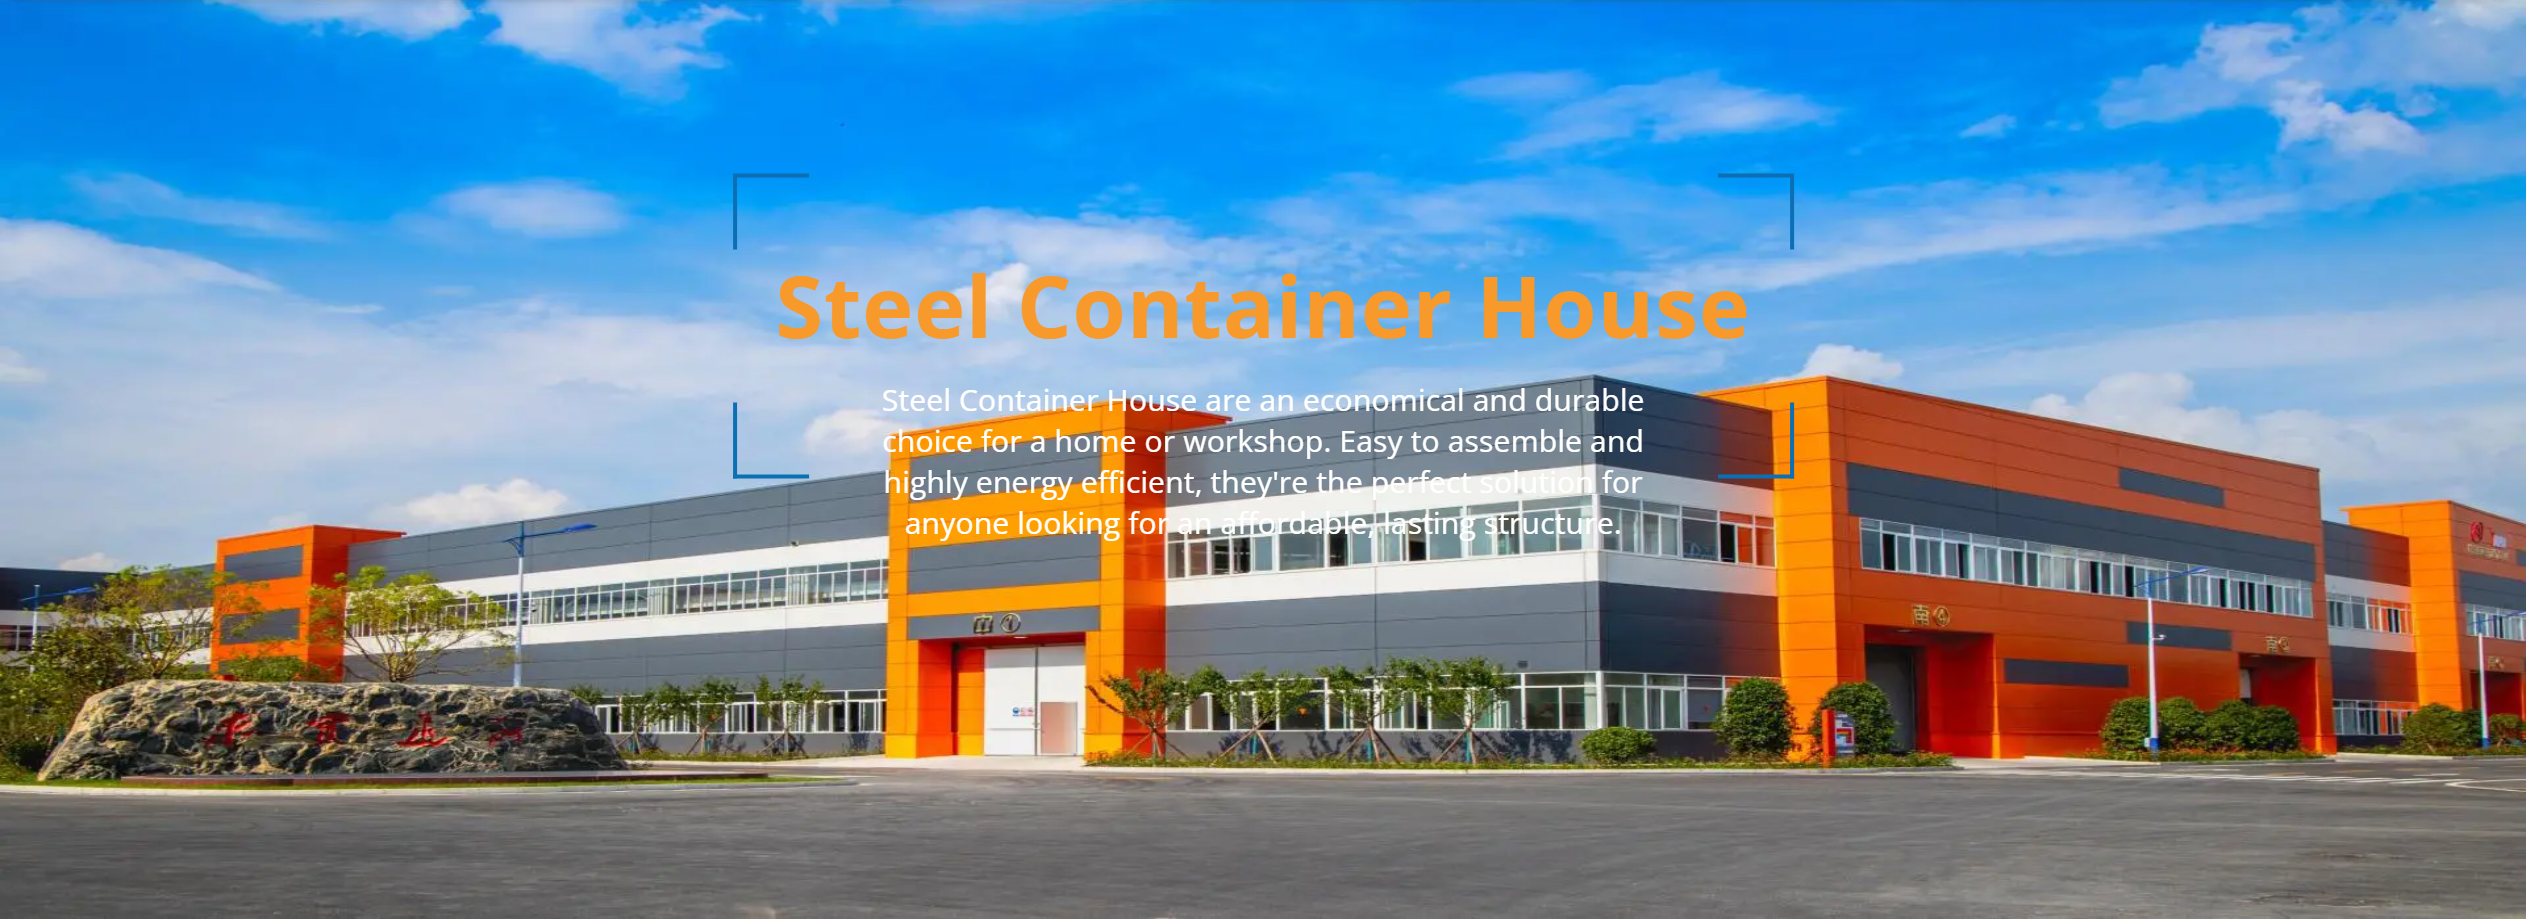 Steel Container House